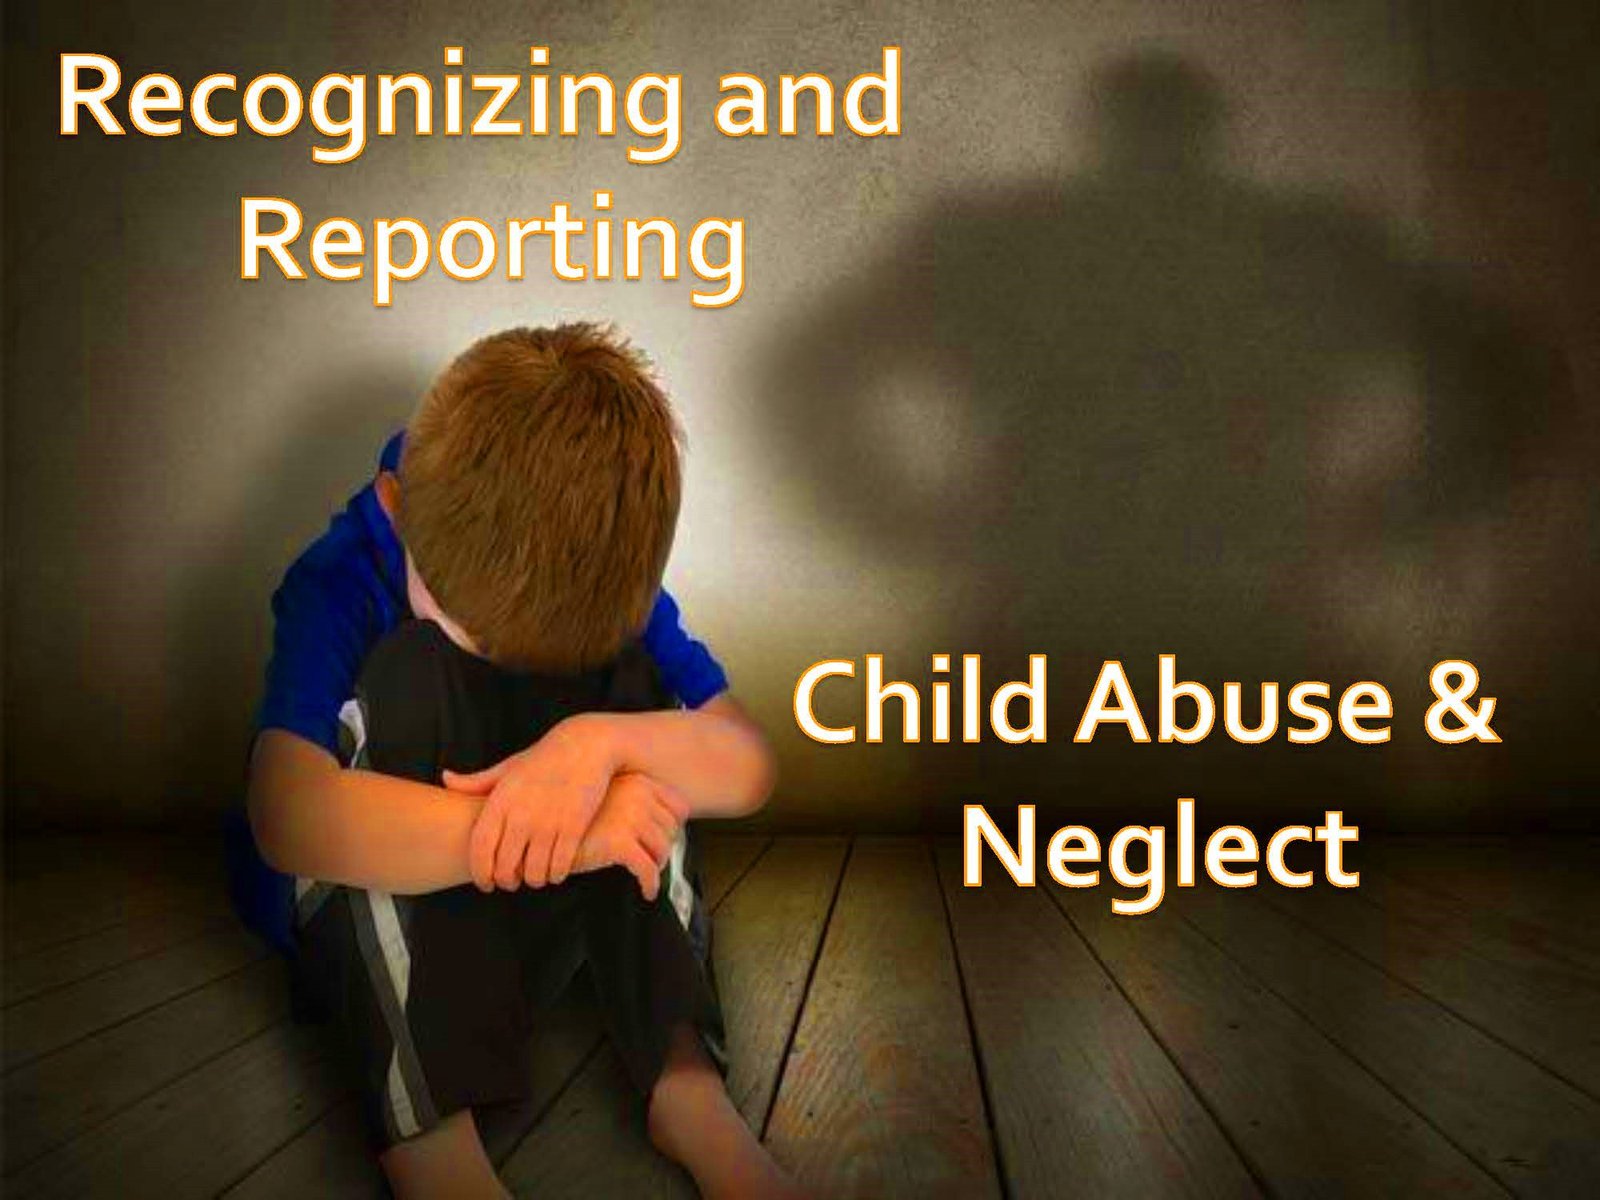 Child Abuse and Neglect Laws and Reporting